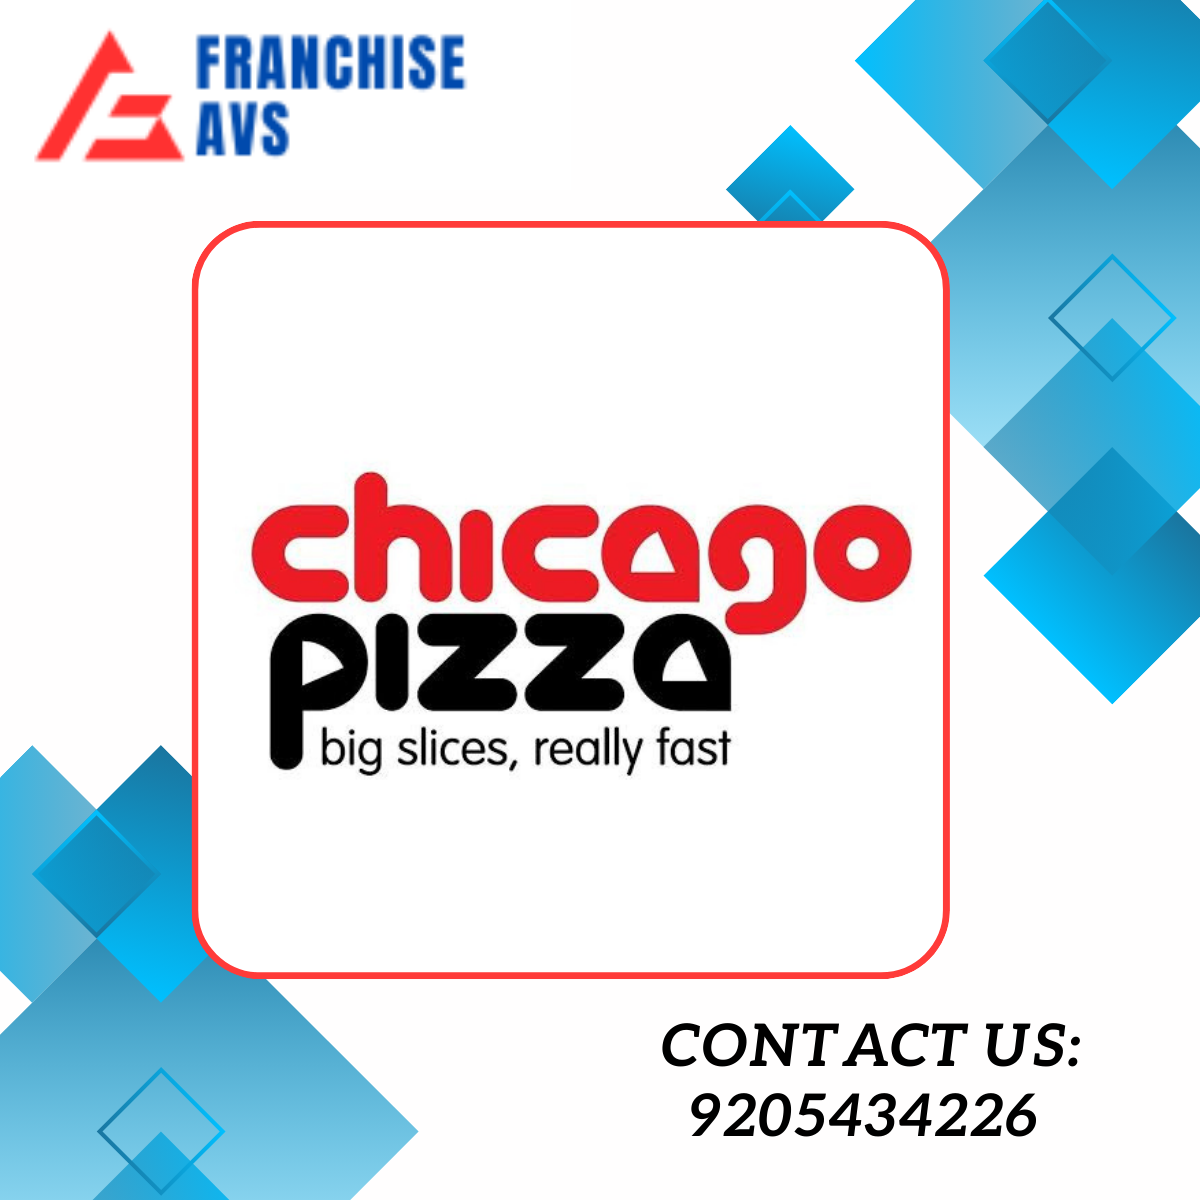 Chicago pizza franchise in india